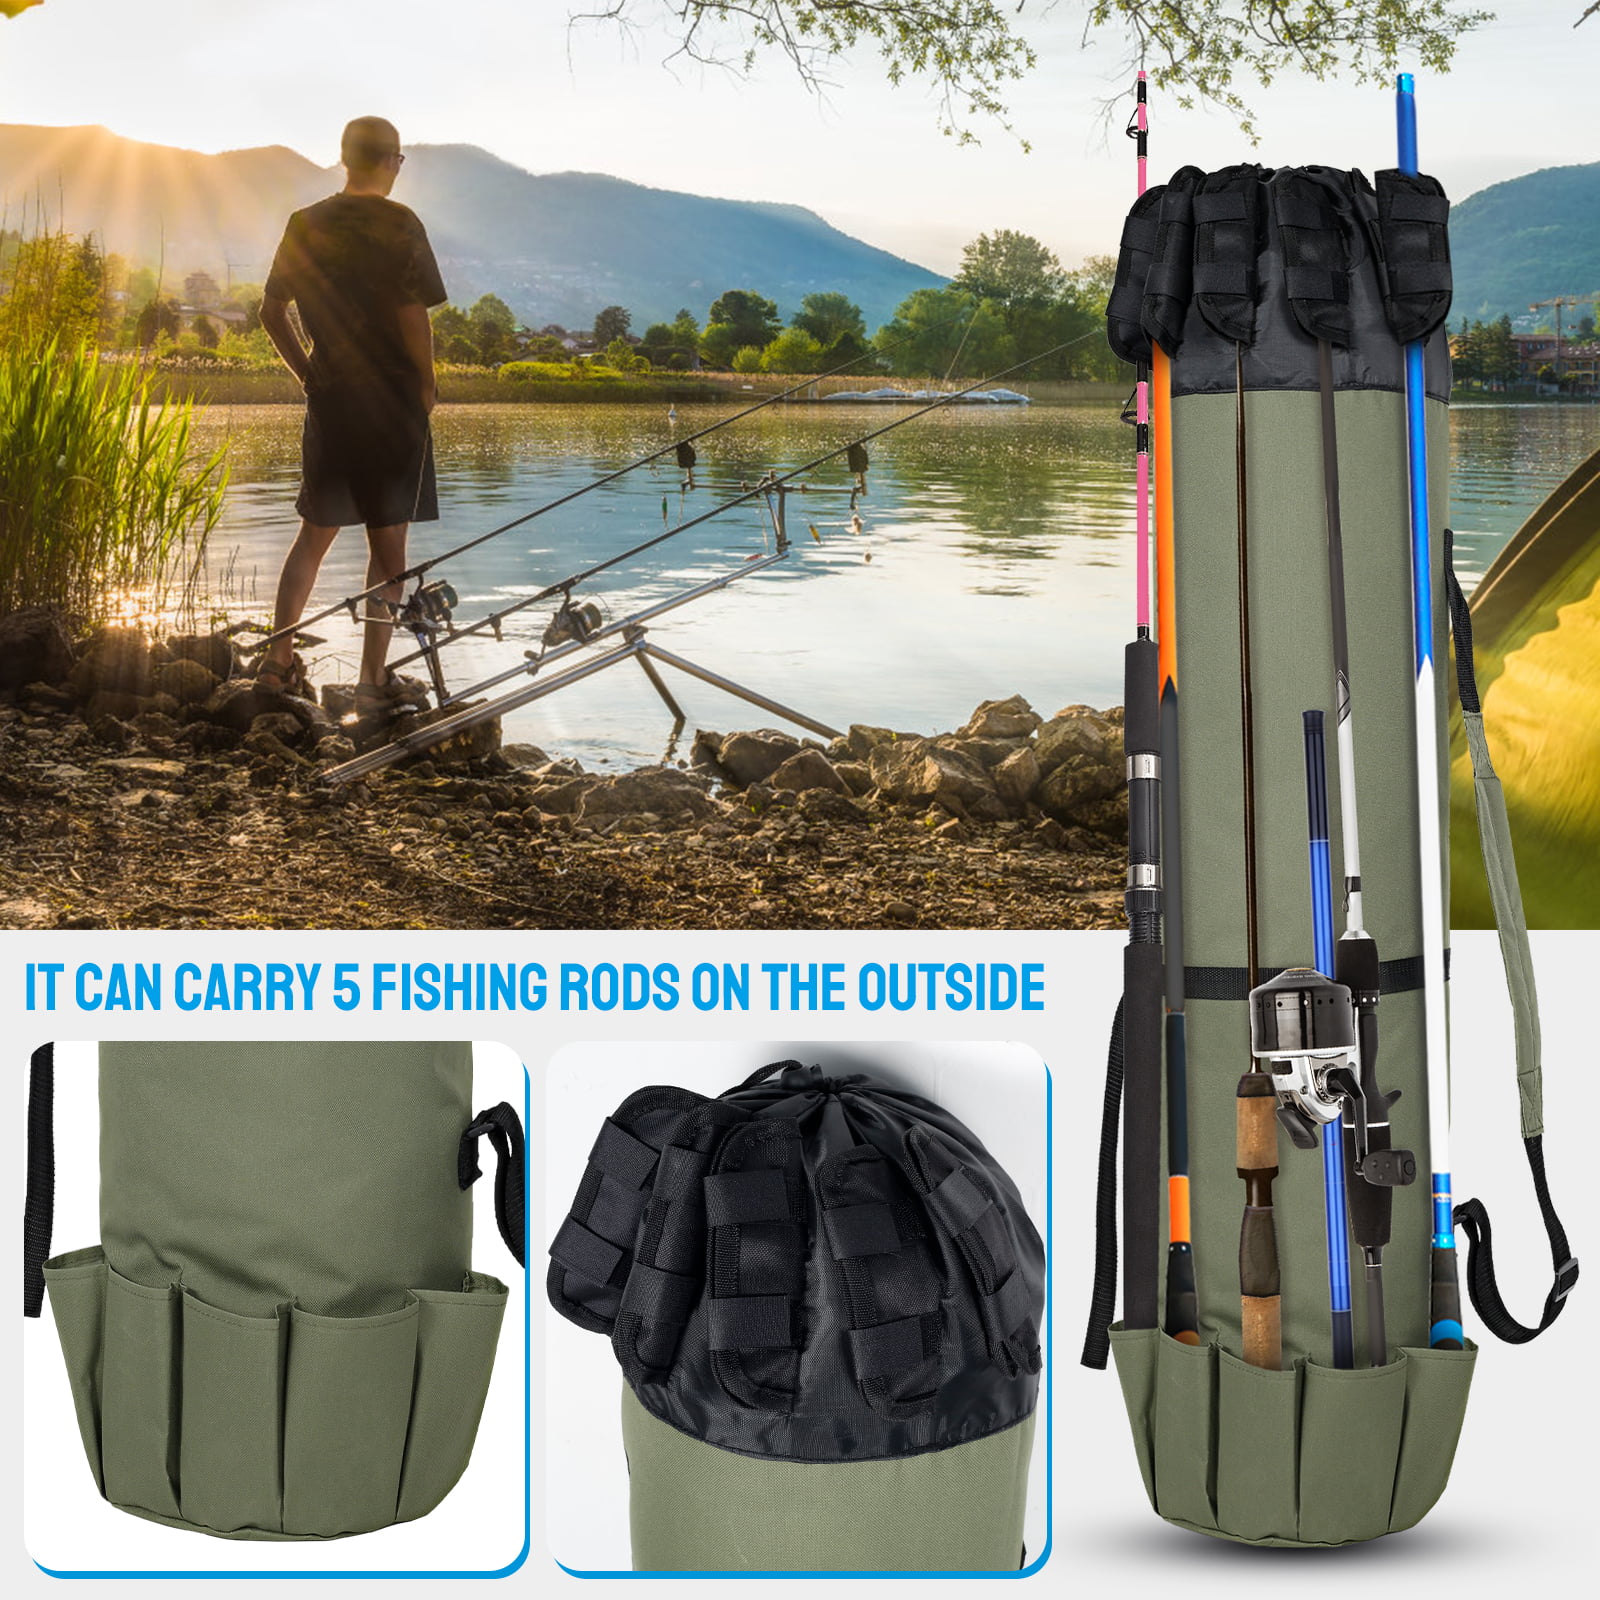 MeterMall Fishing Pole Bag With Rod Holder Fishing Rod Bag Carrier